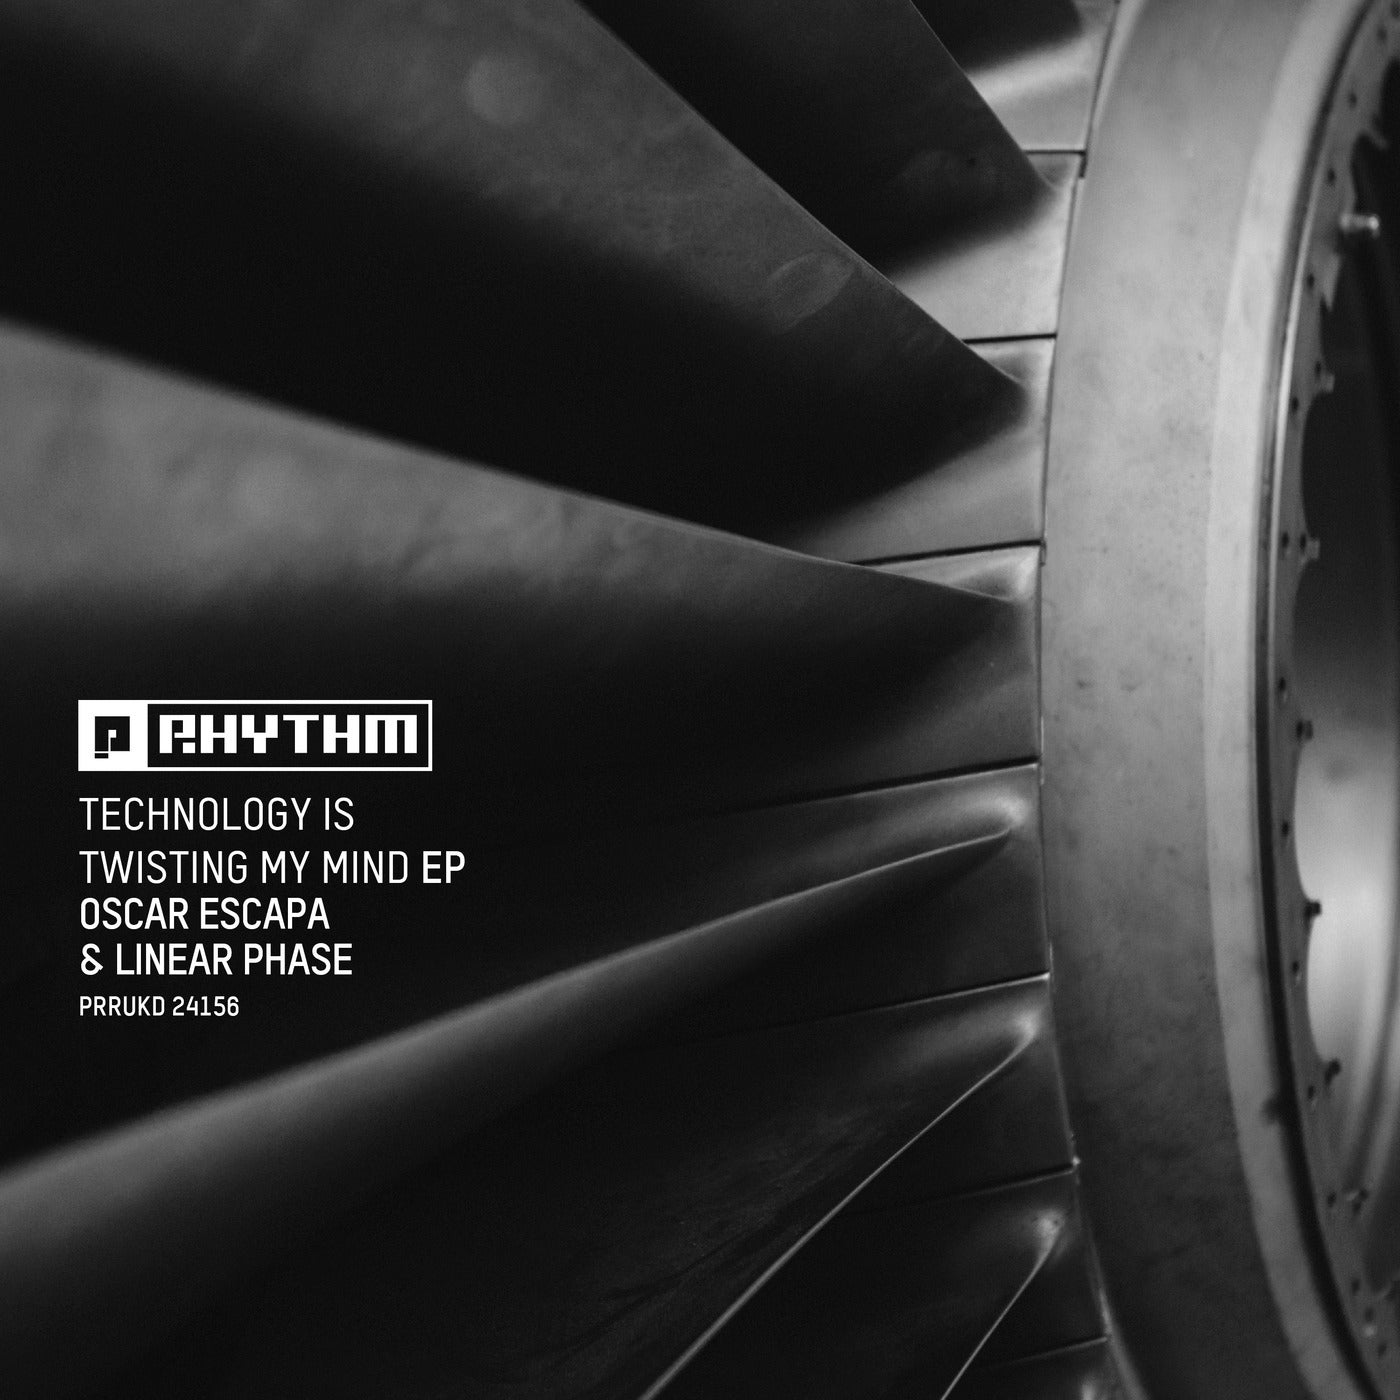 image cover: Oscar Escapa & Linear Phase - Technology Is Twisting My Mind EP on Planet Rhythm